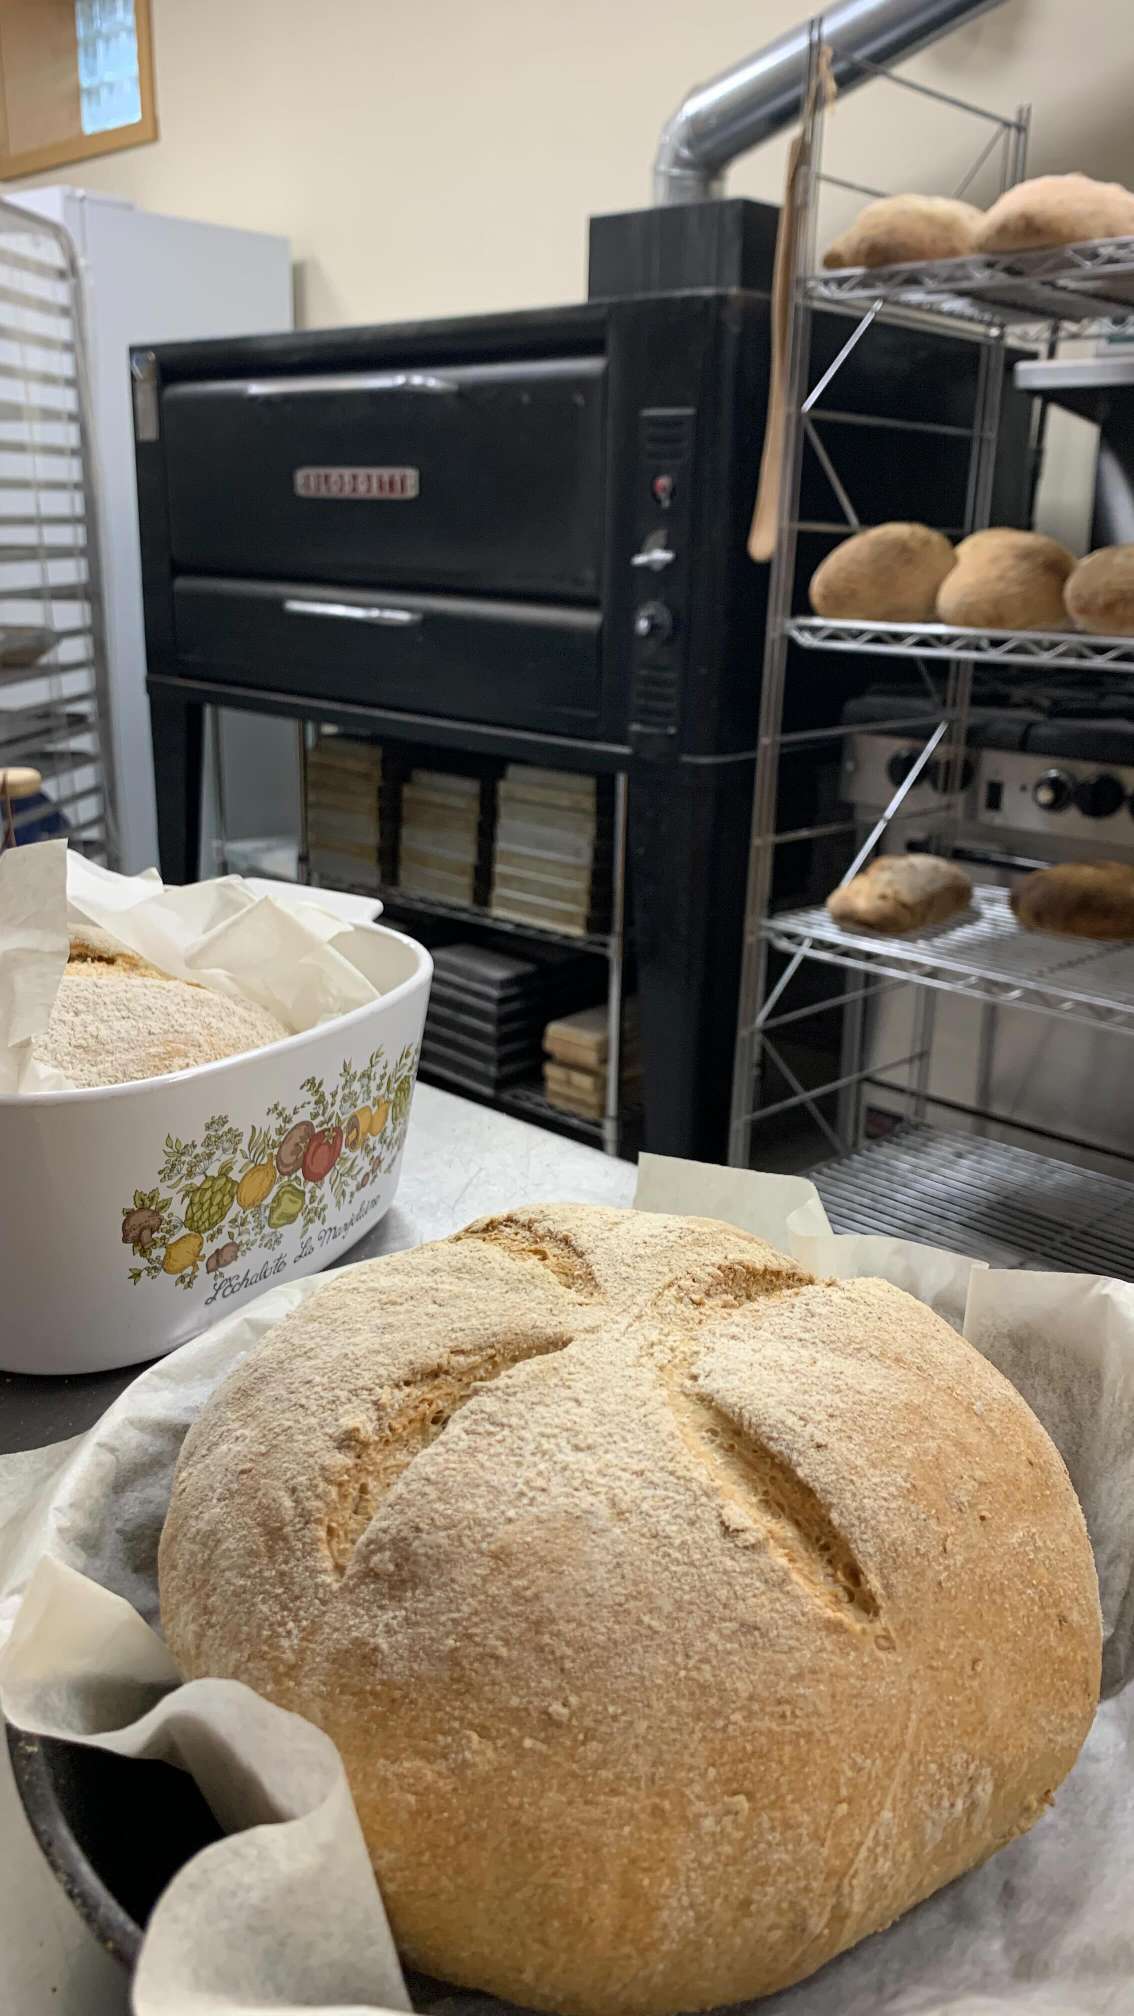 Father Paul, @orabreads, took time out of his busy schedule to teach some eager missionaries how to bake bread! 

What a fun day for everyone involved! ðŸ‘©ðŸ¼‍ðŸ³✨ðŸž